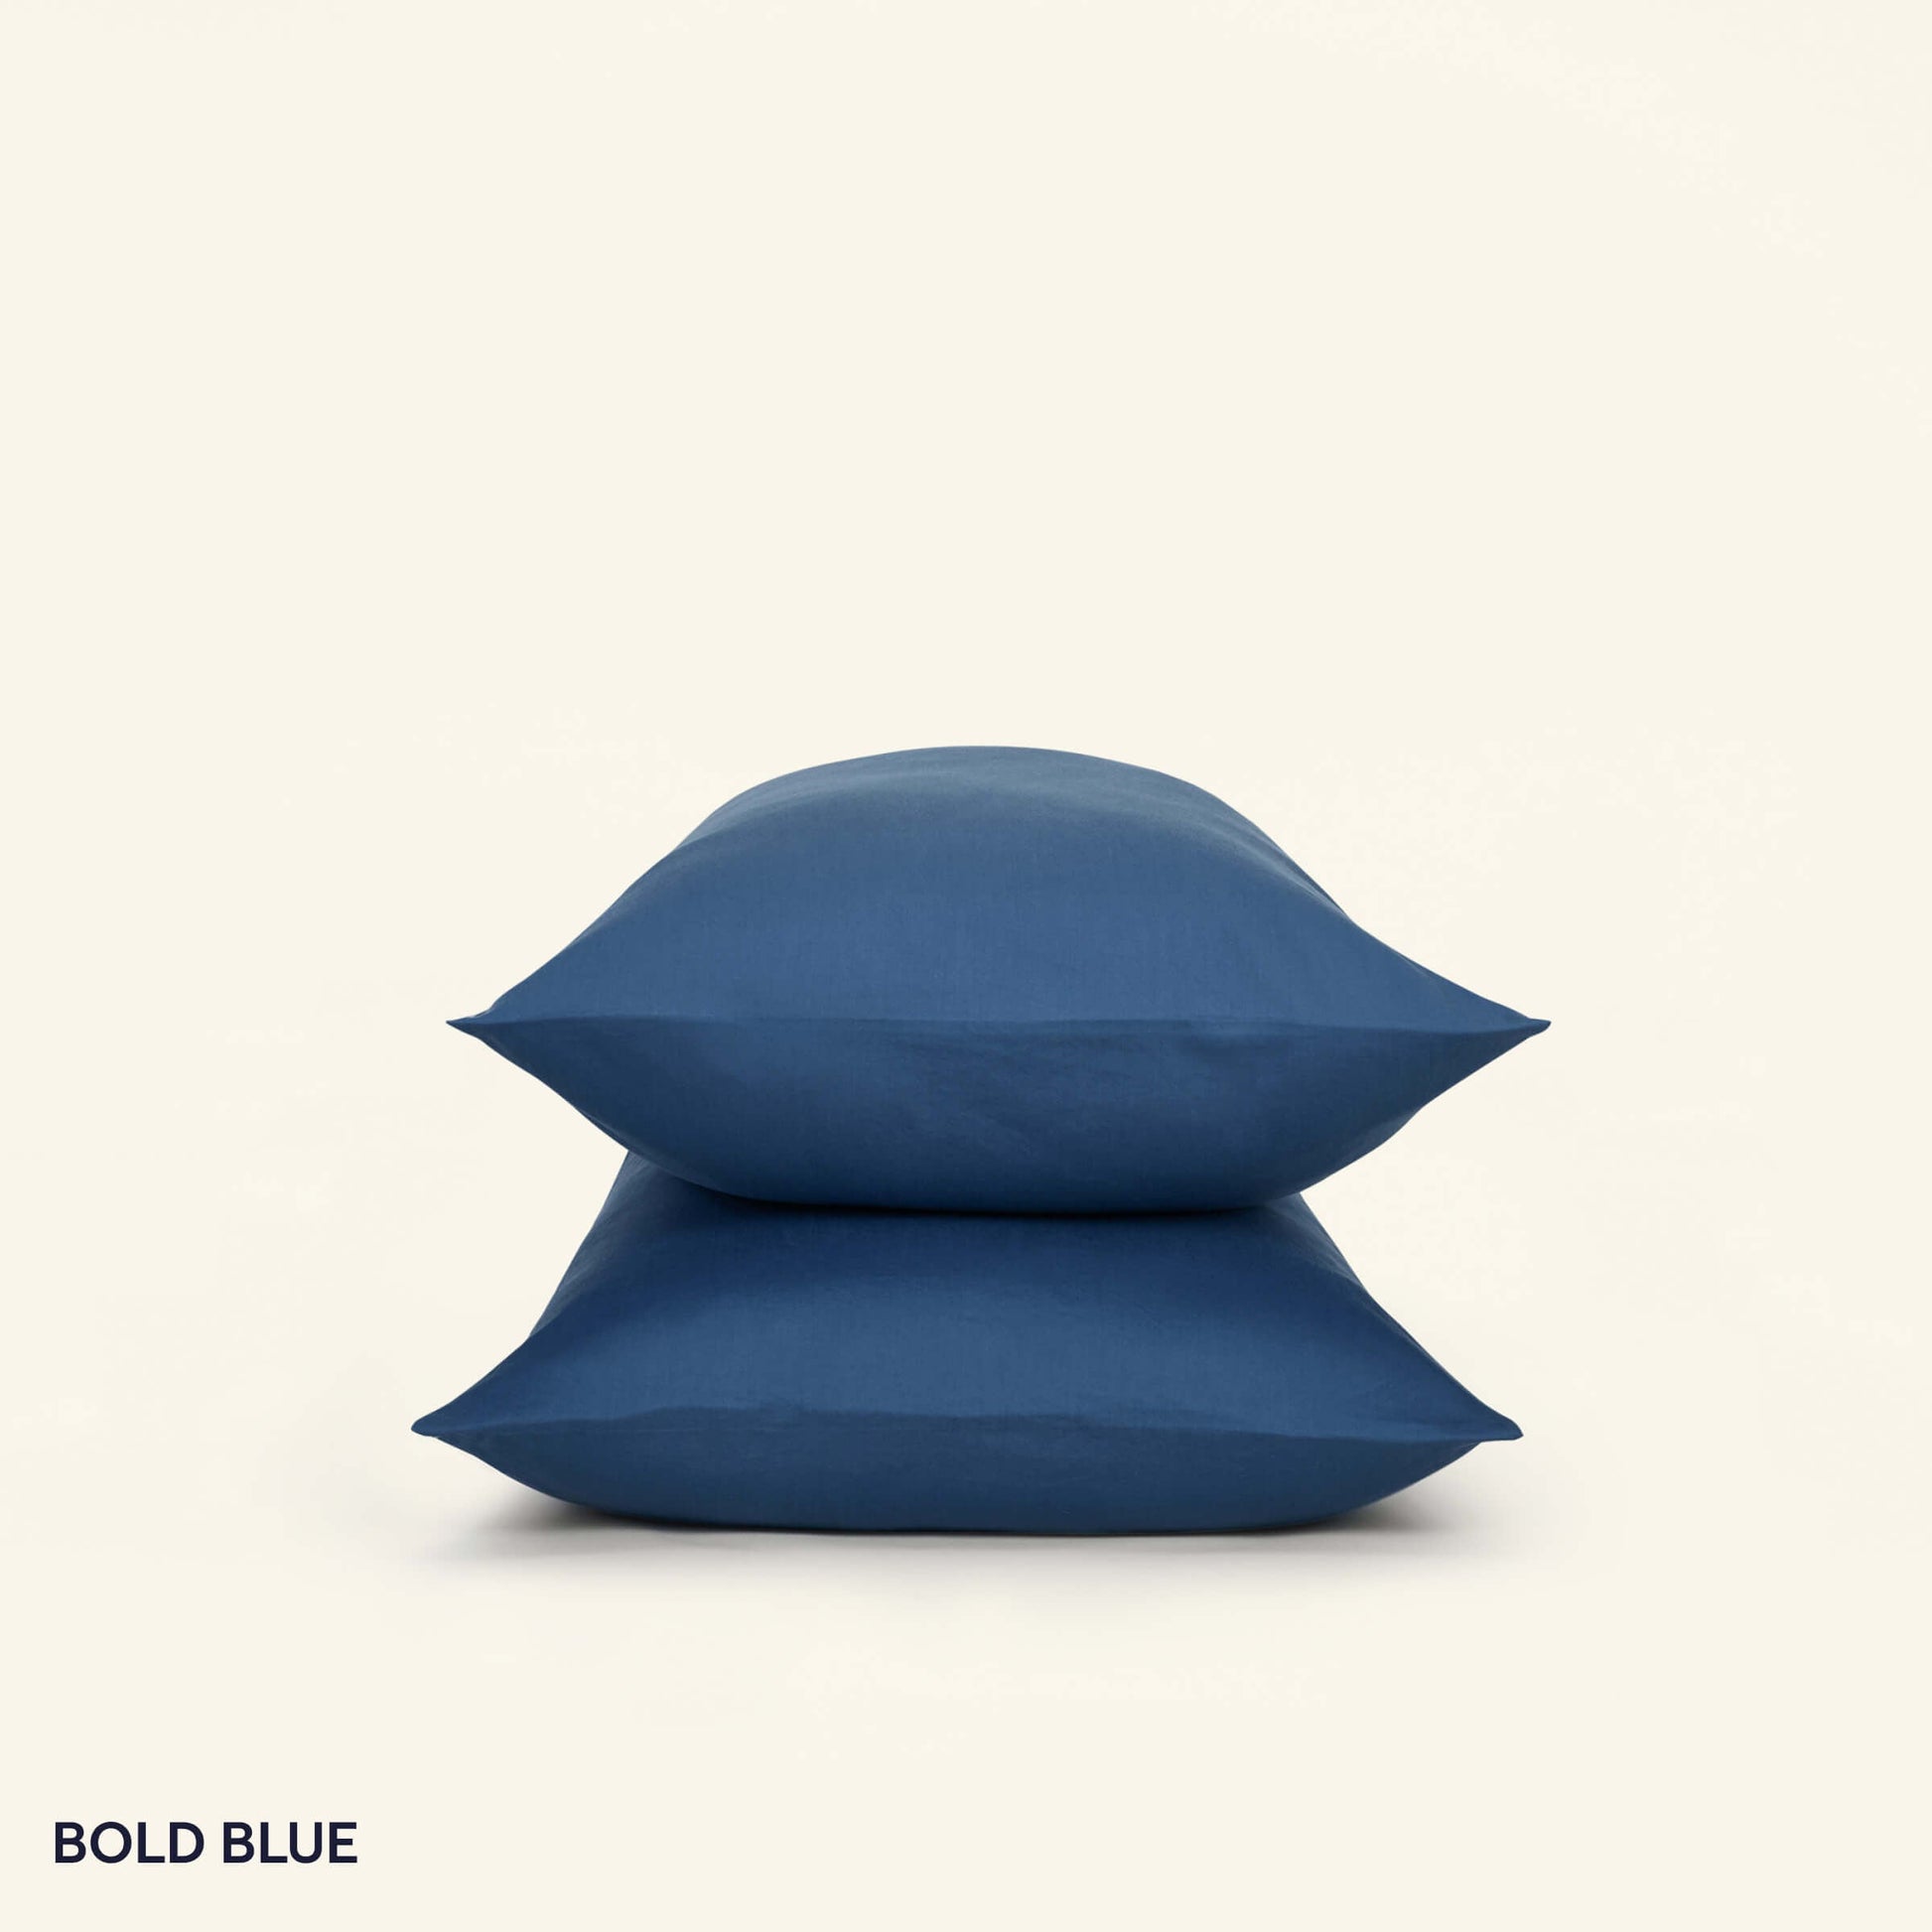 The Slumber Cloud Essential Pillowcase set made with Outlast temperature regulation technology in bold blue